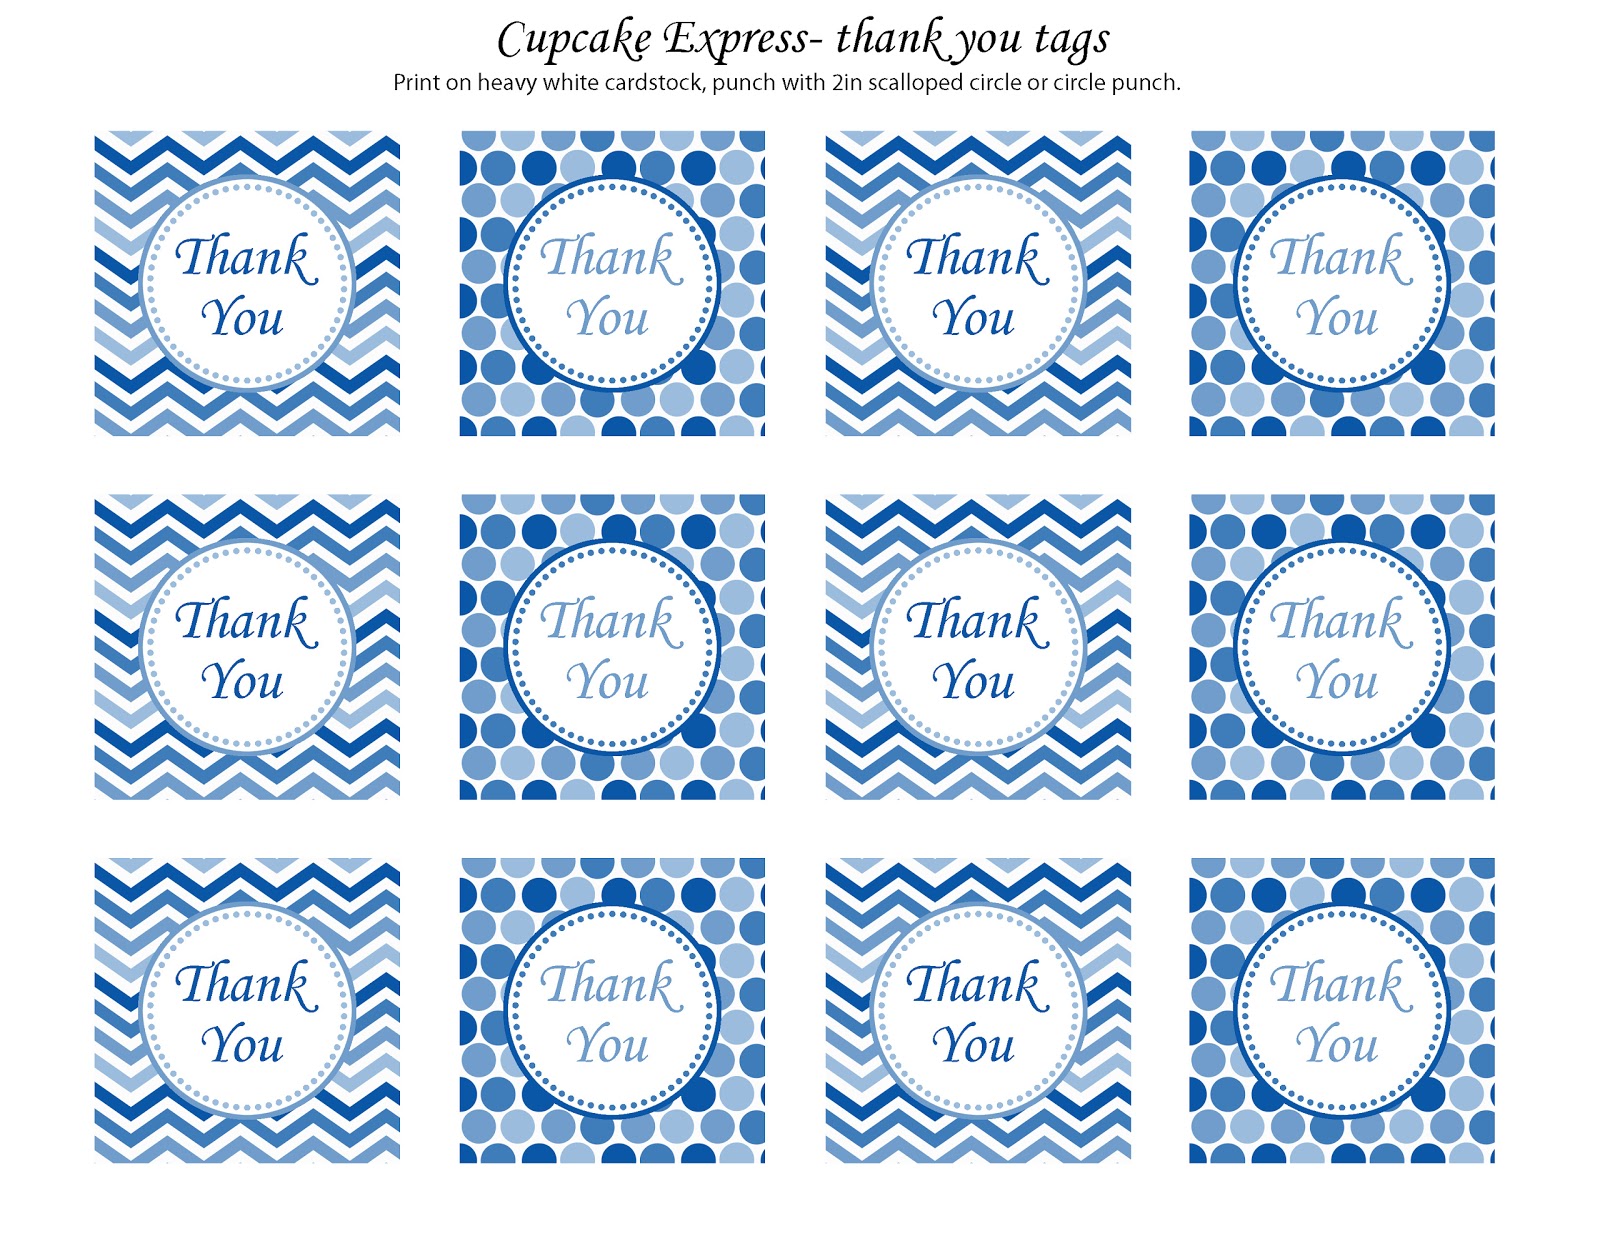 freebies-free-printables-baby-free-baby-shower-printables-thank-you